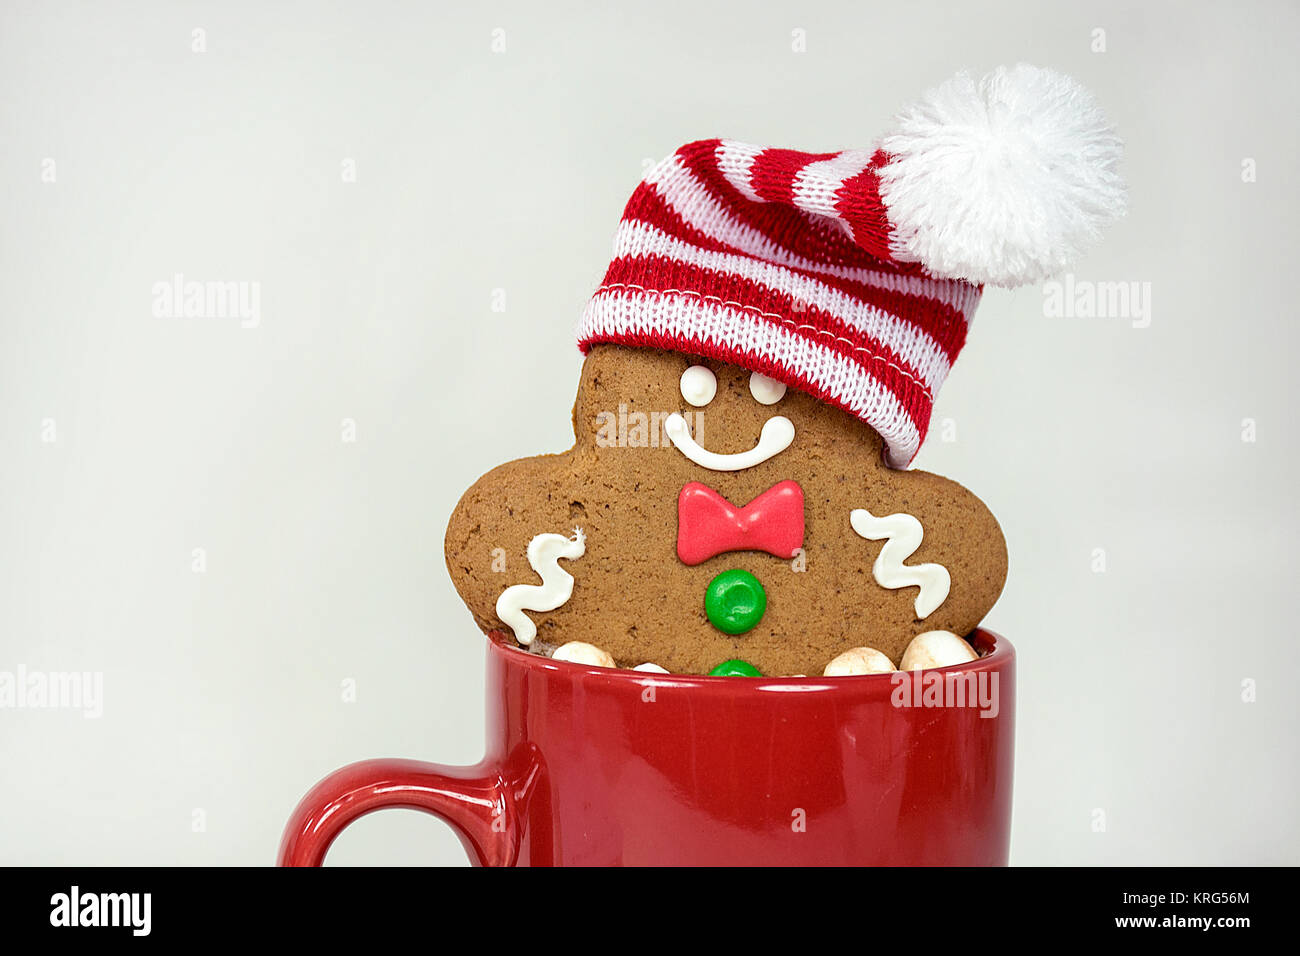 Christmas gingerbread man with stocking cap in hot chocolate drink in red mug isolated on white background Stock Photo